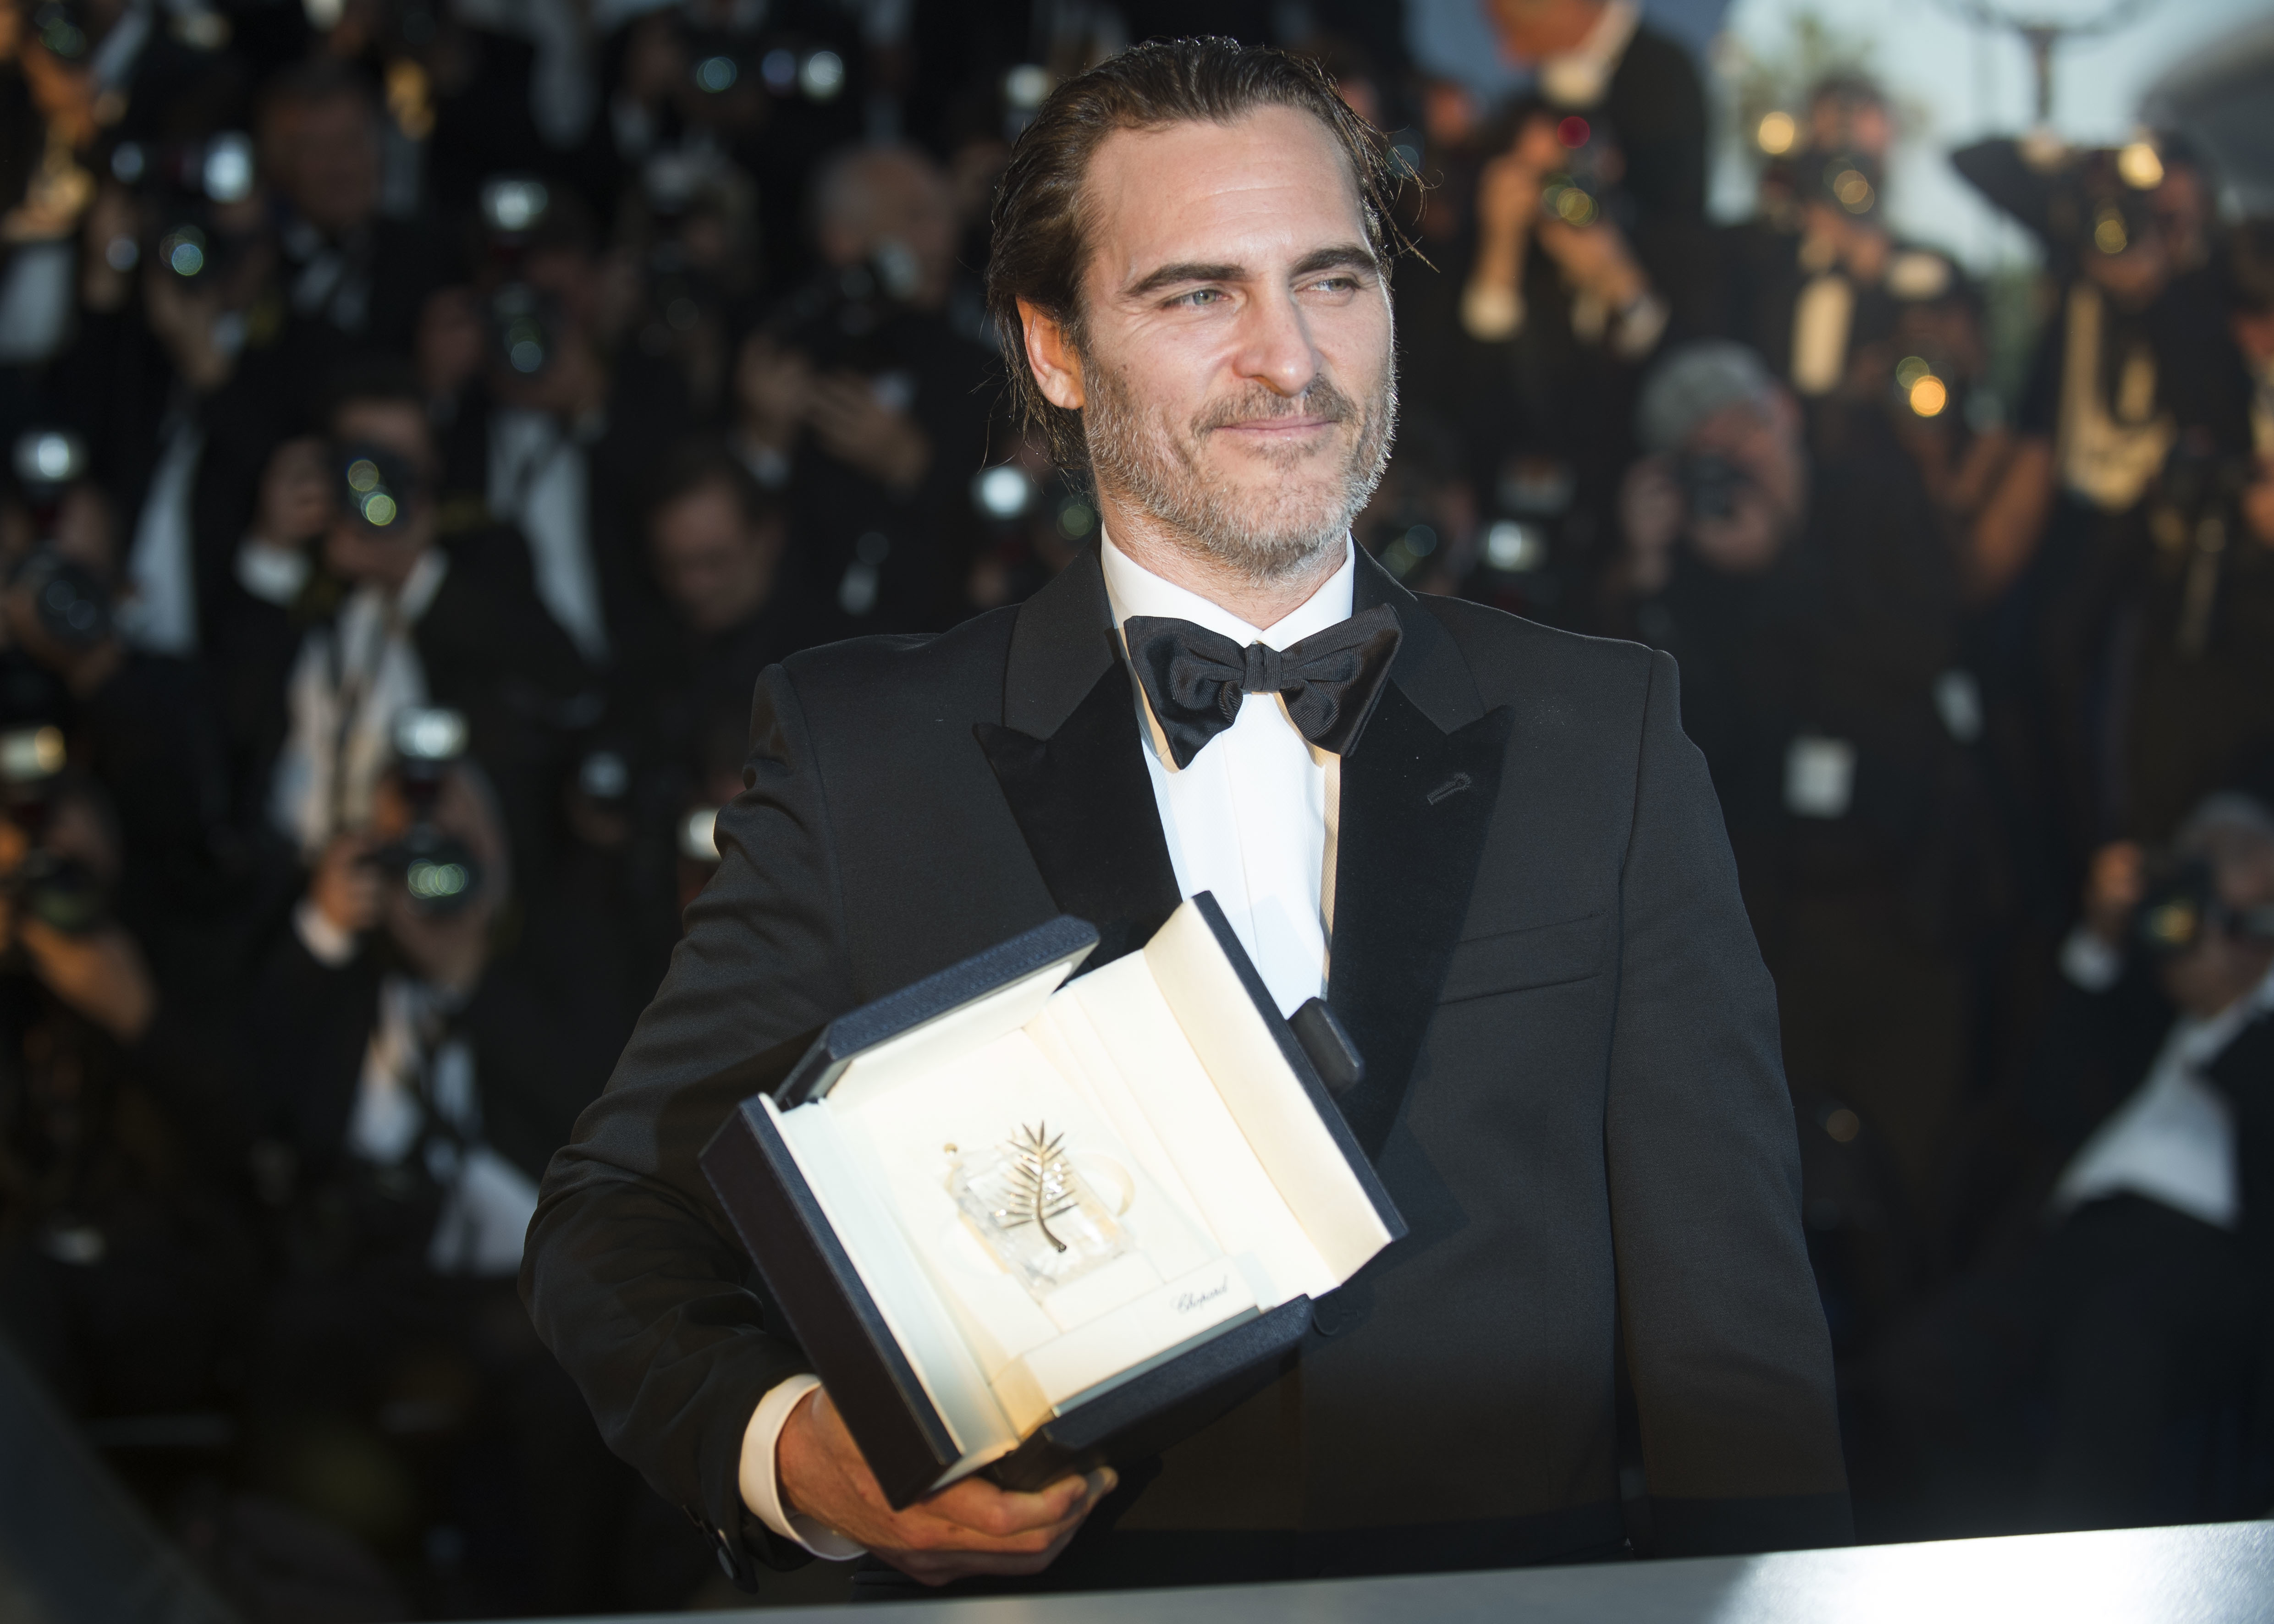 Actor Joaquin Phoenix with his Best Actor award for the film You Were Never Really Here poses for photographers during a photo call following the awards ceremony at the 70th international film festival, Cannes, southern France, Sunday, May 28, 2017. (Photo by Arthur Mola/Invision/AP)